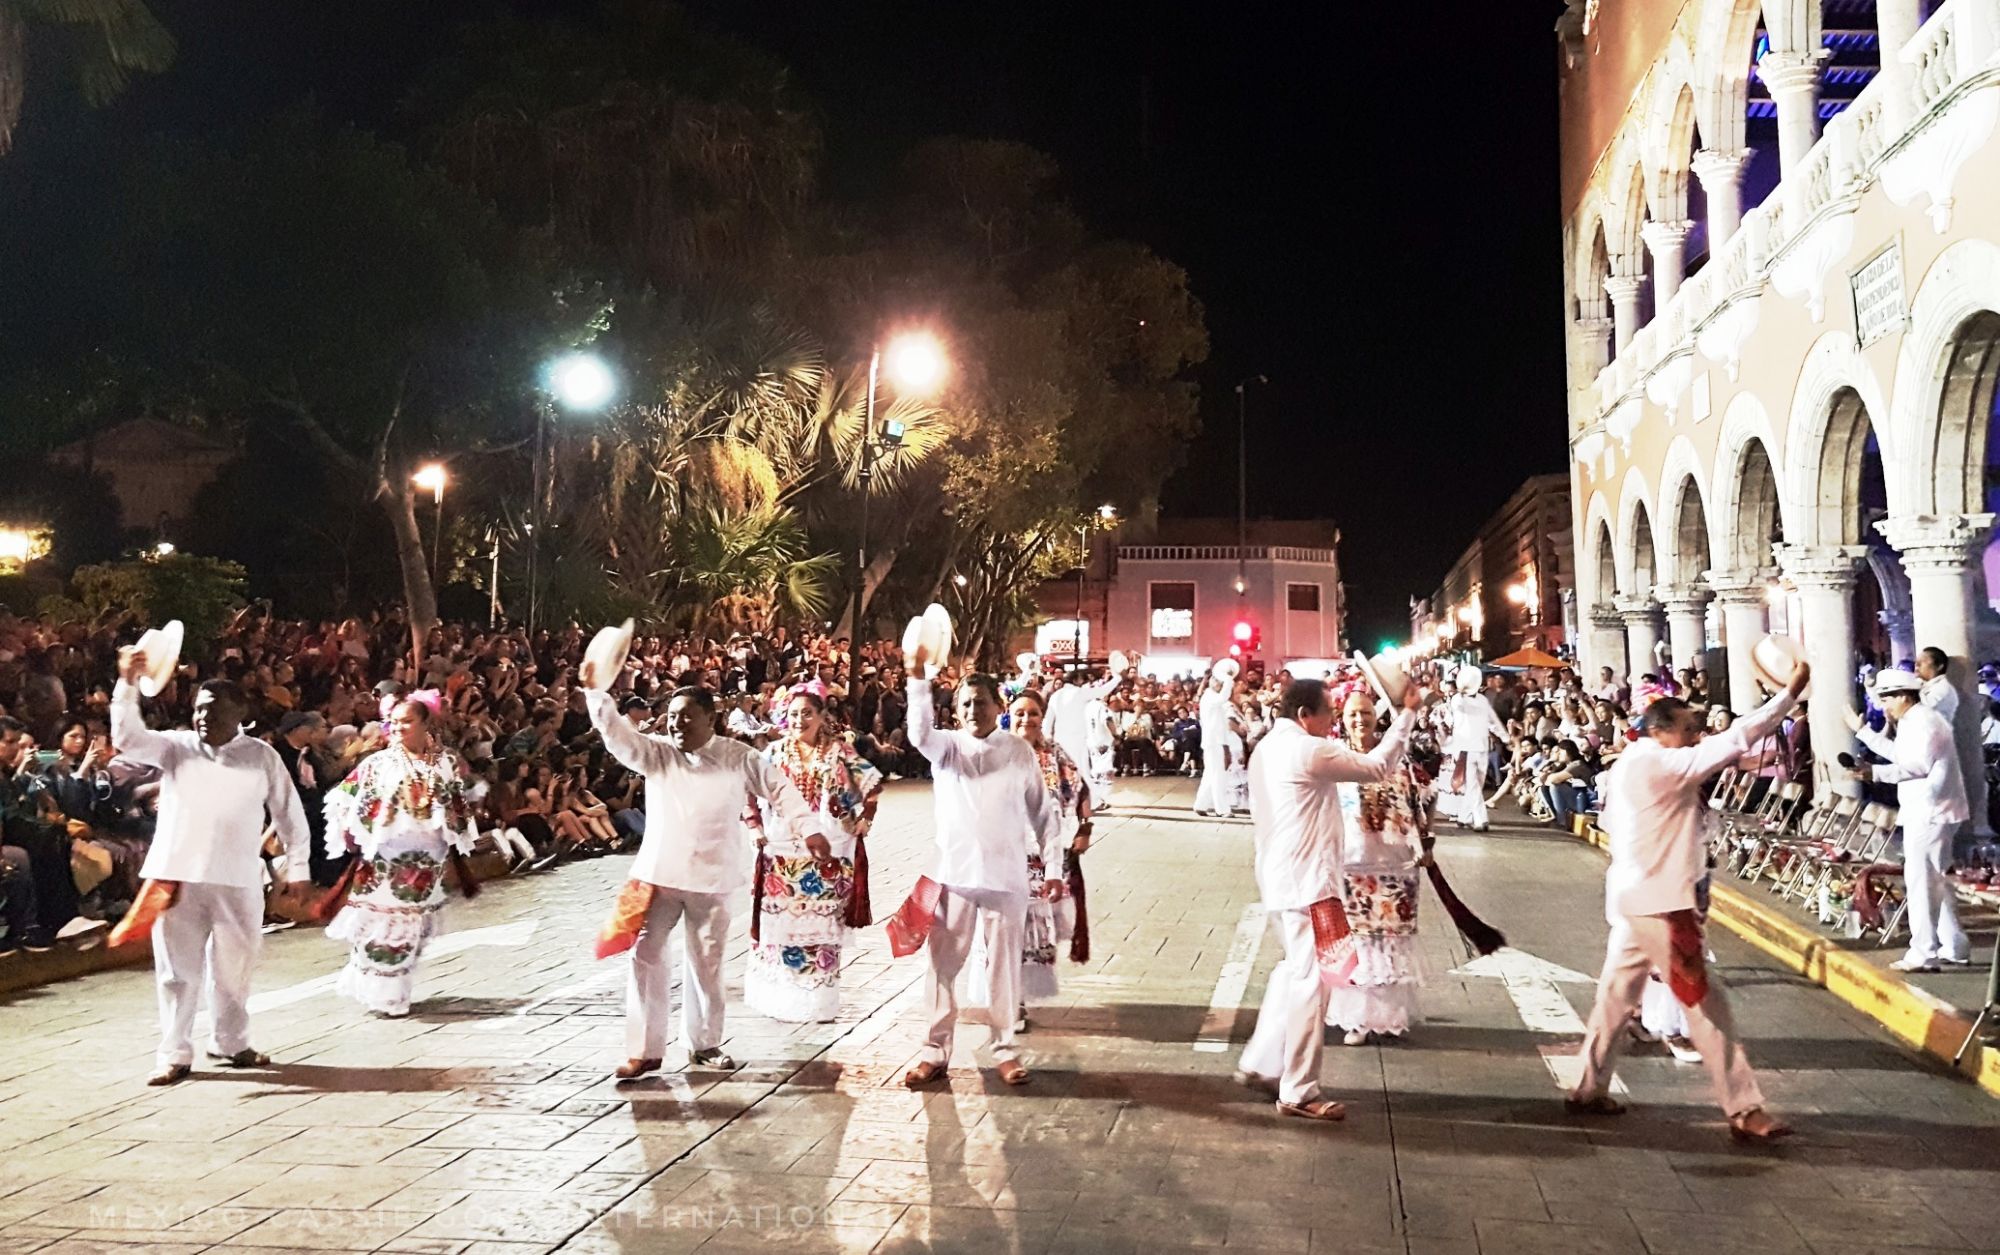 men and women in traditional Maya costume dancing in the street at night